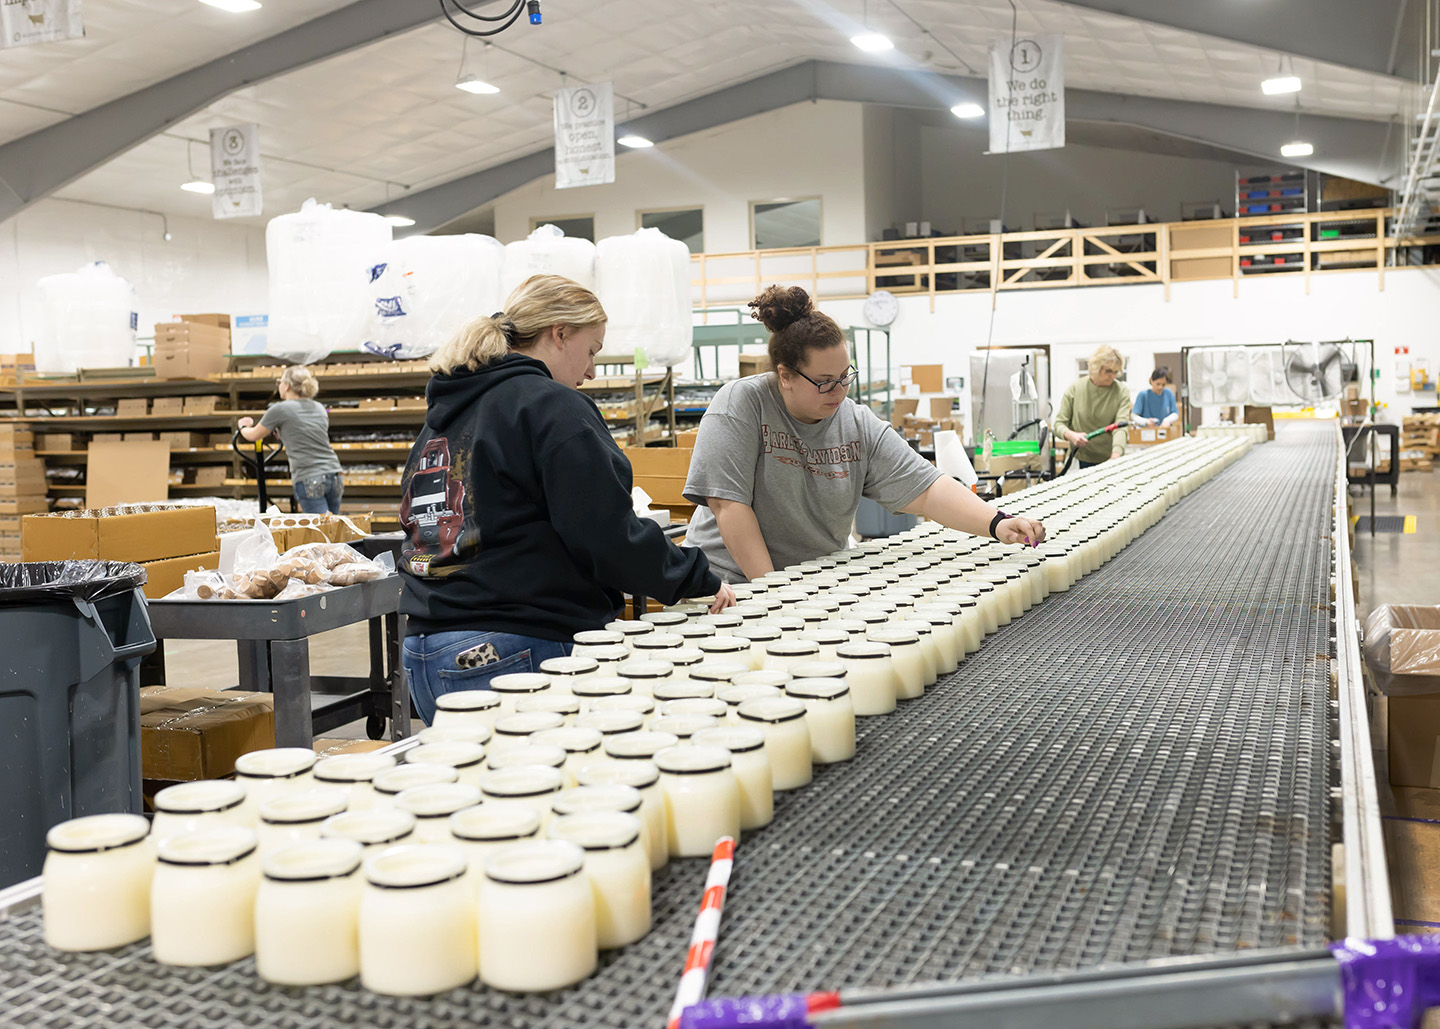 Milkhouse Candle Company wholesale products